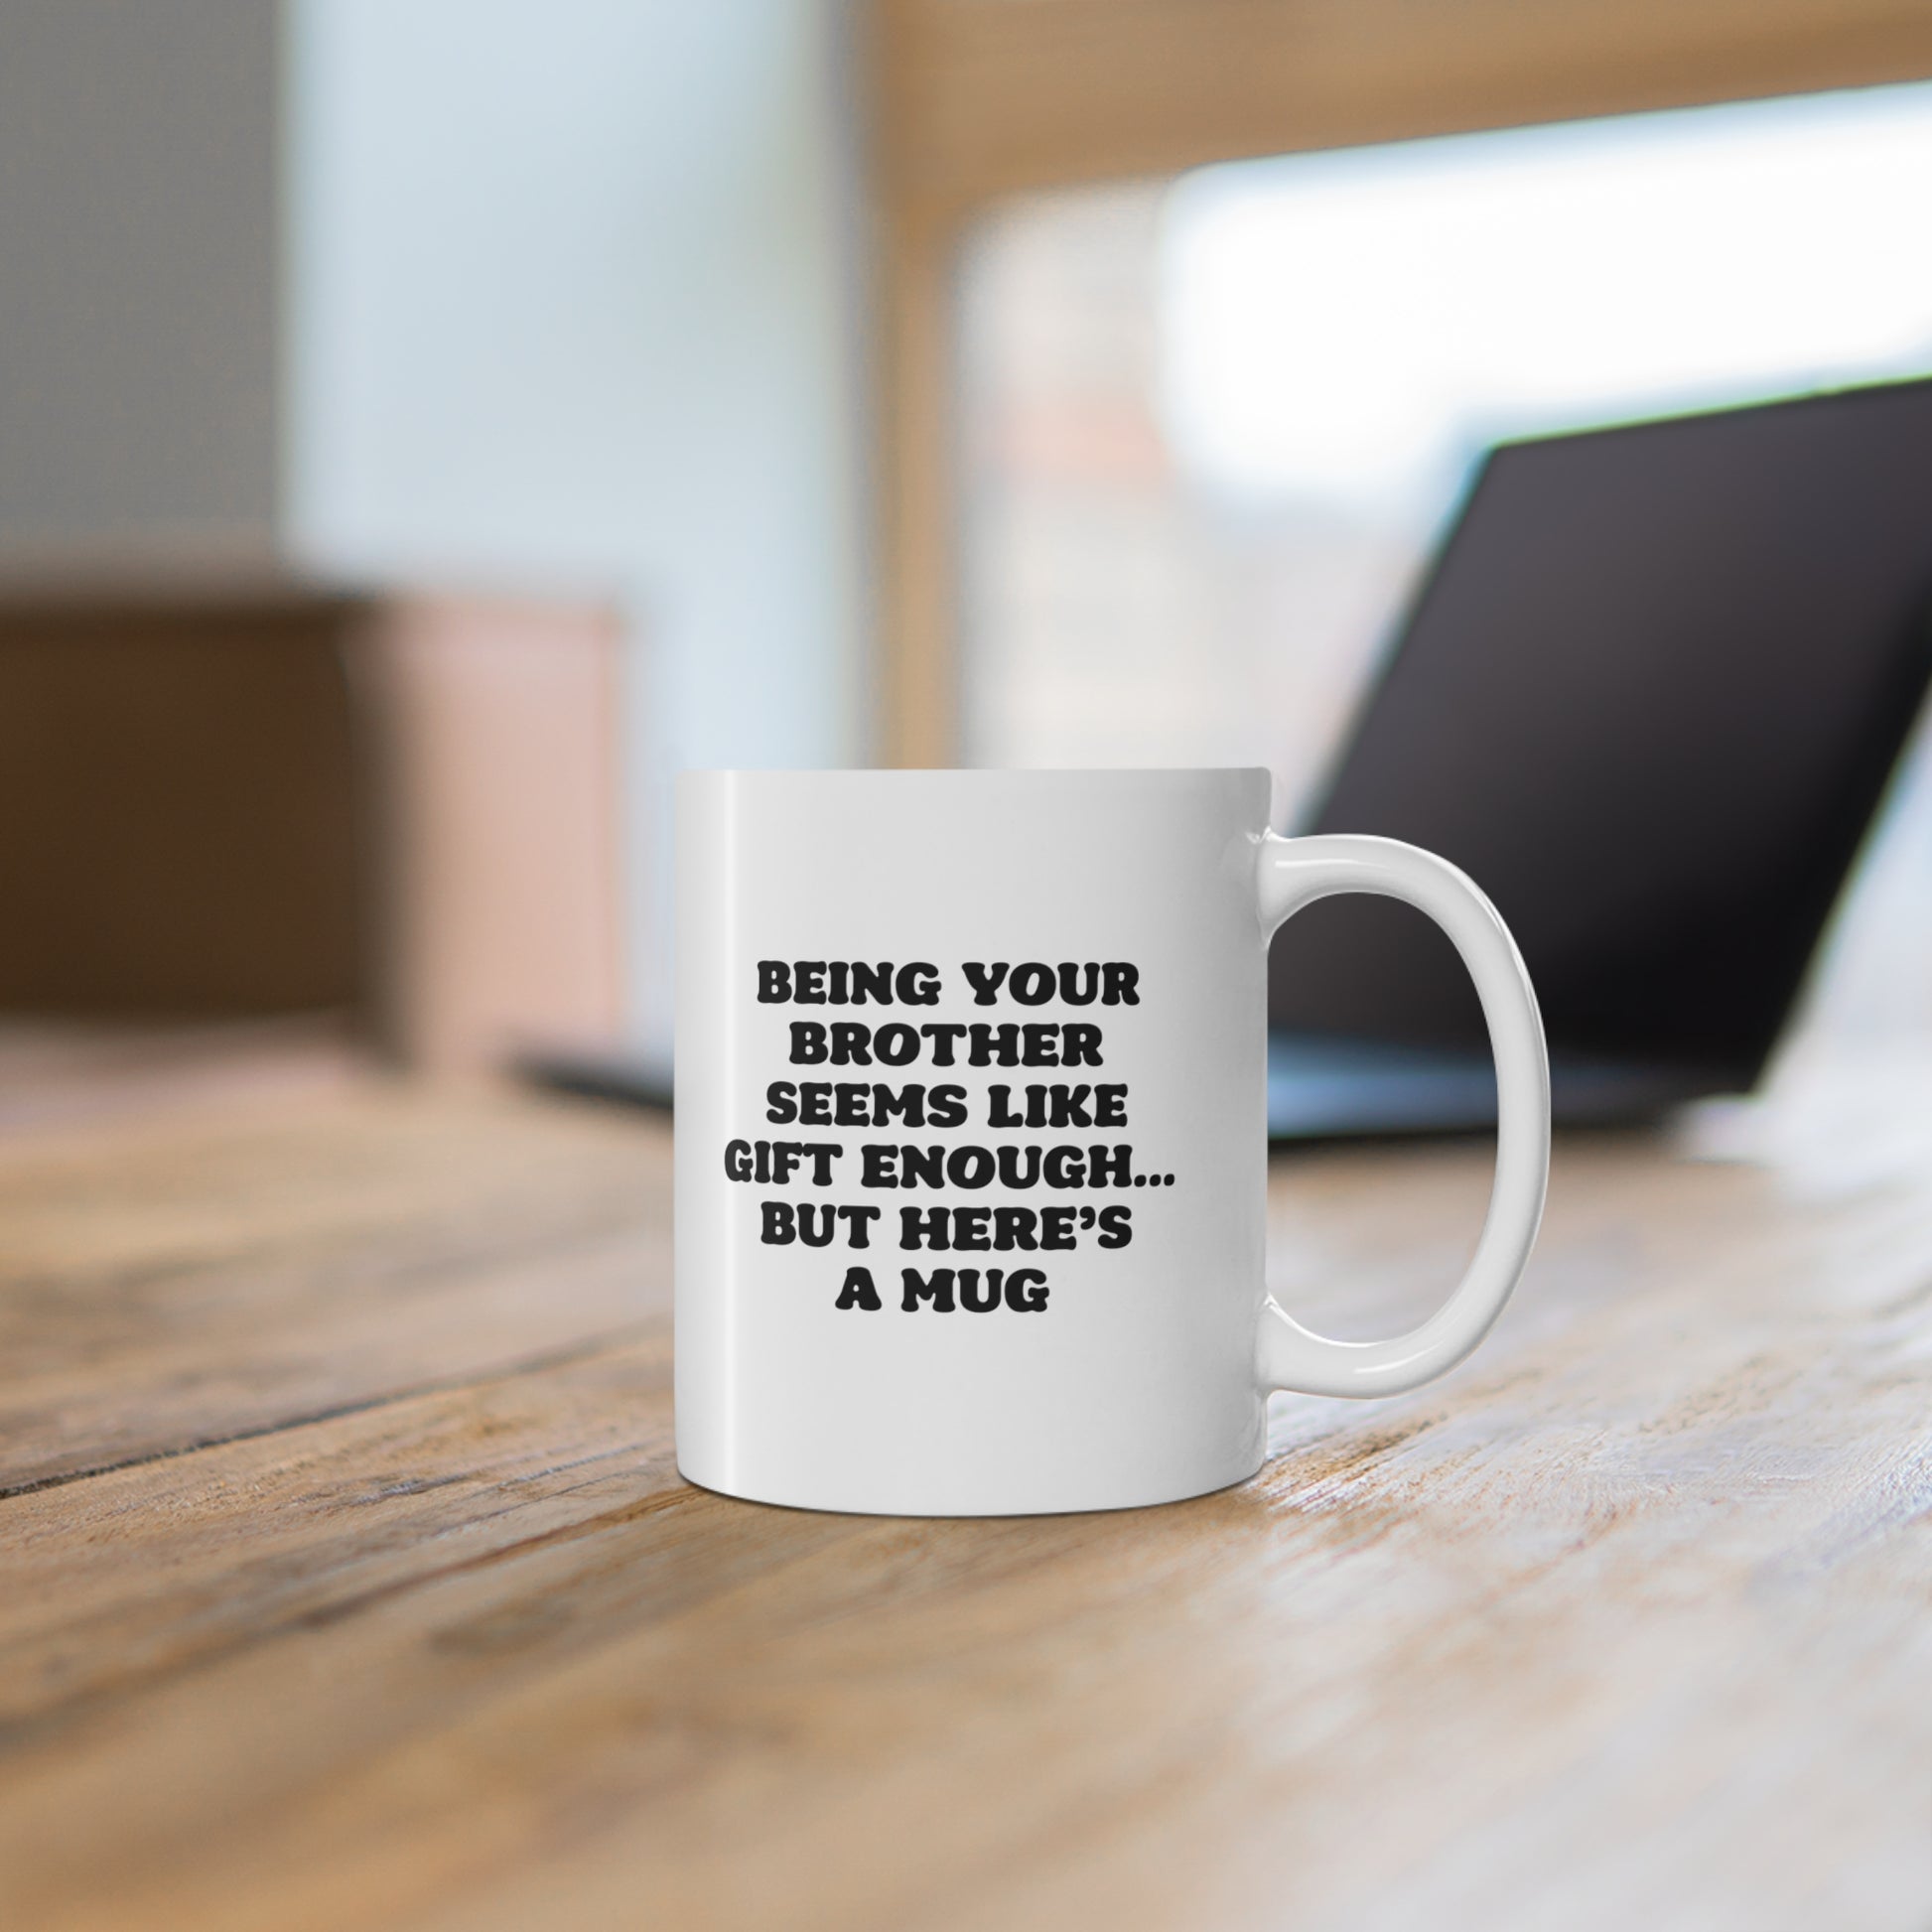 ceramic mug with quote: Being your brother seems like gift enough but here's a mug